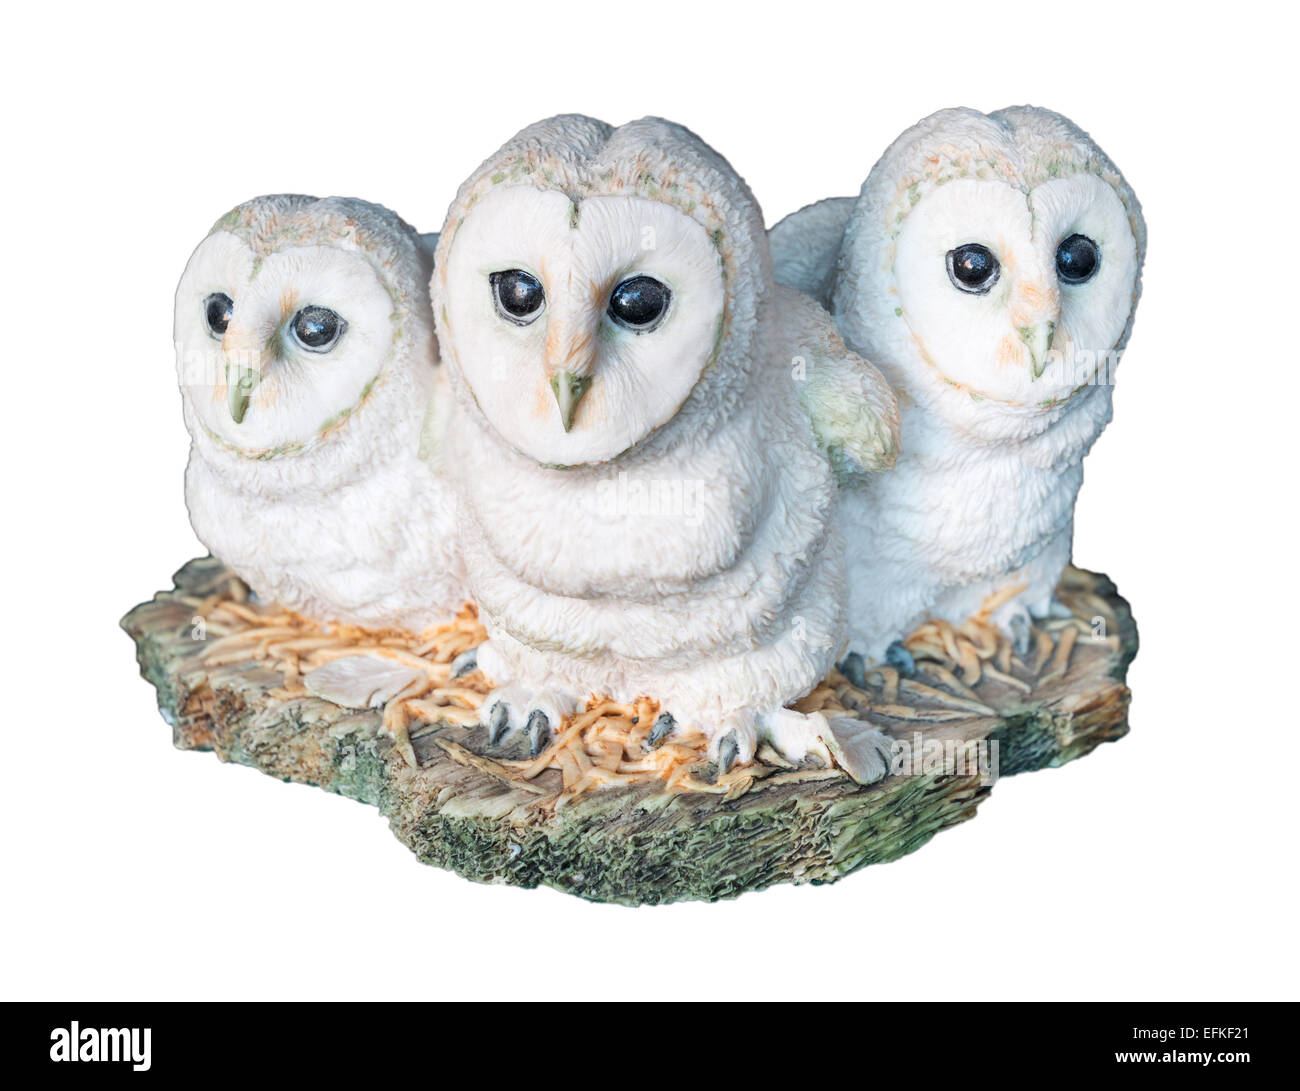 Border Fine Arts figurine depicting three young barn owls or owlets, isolated on a white background Stock Photo